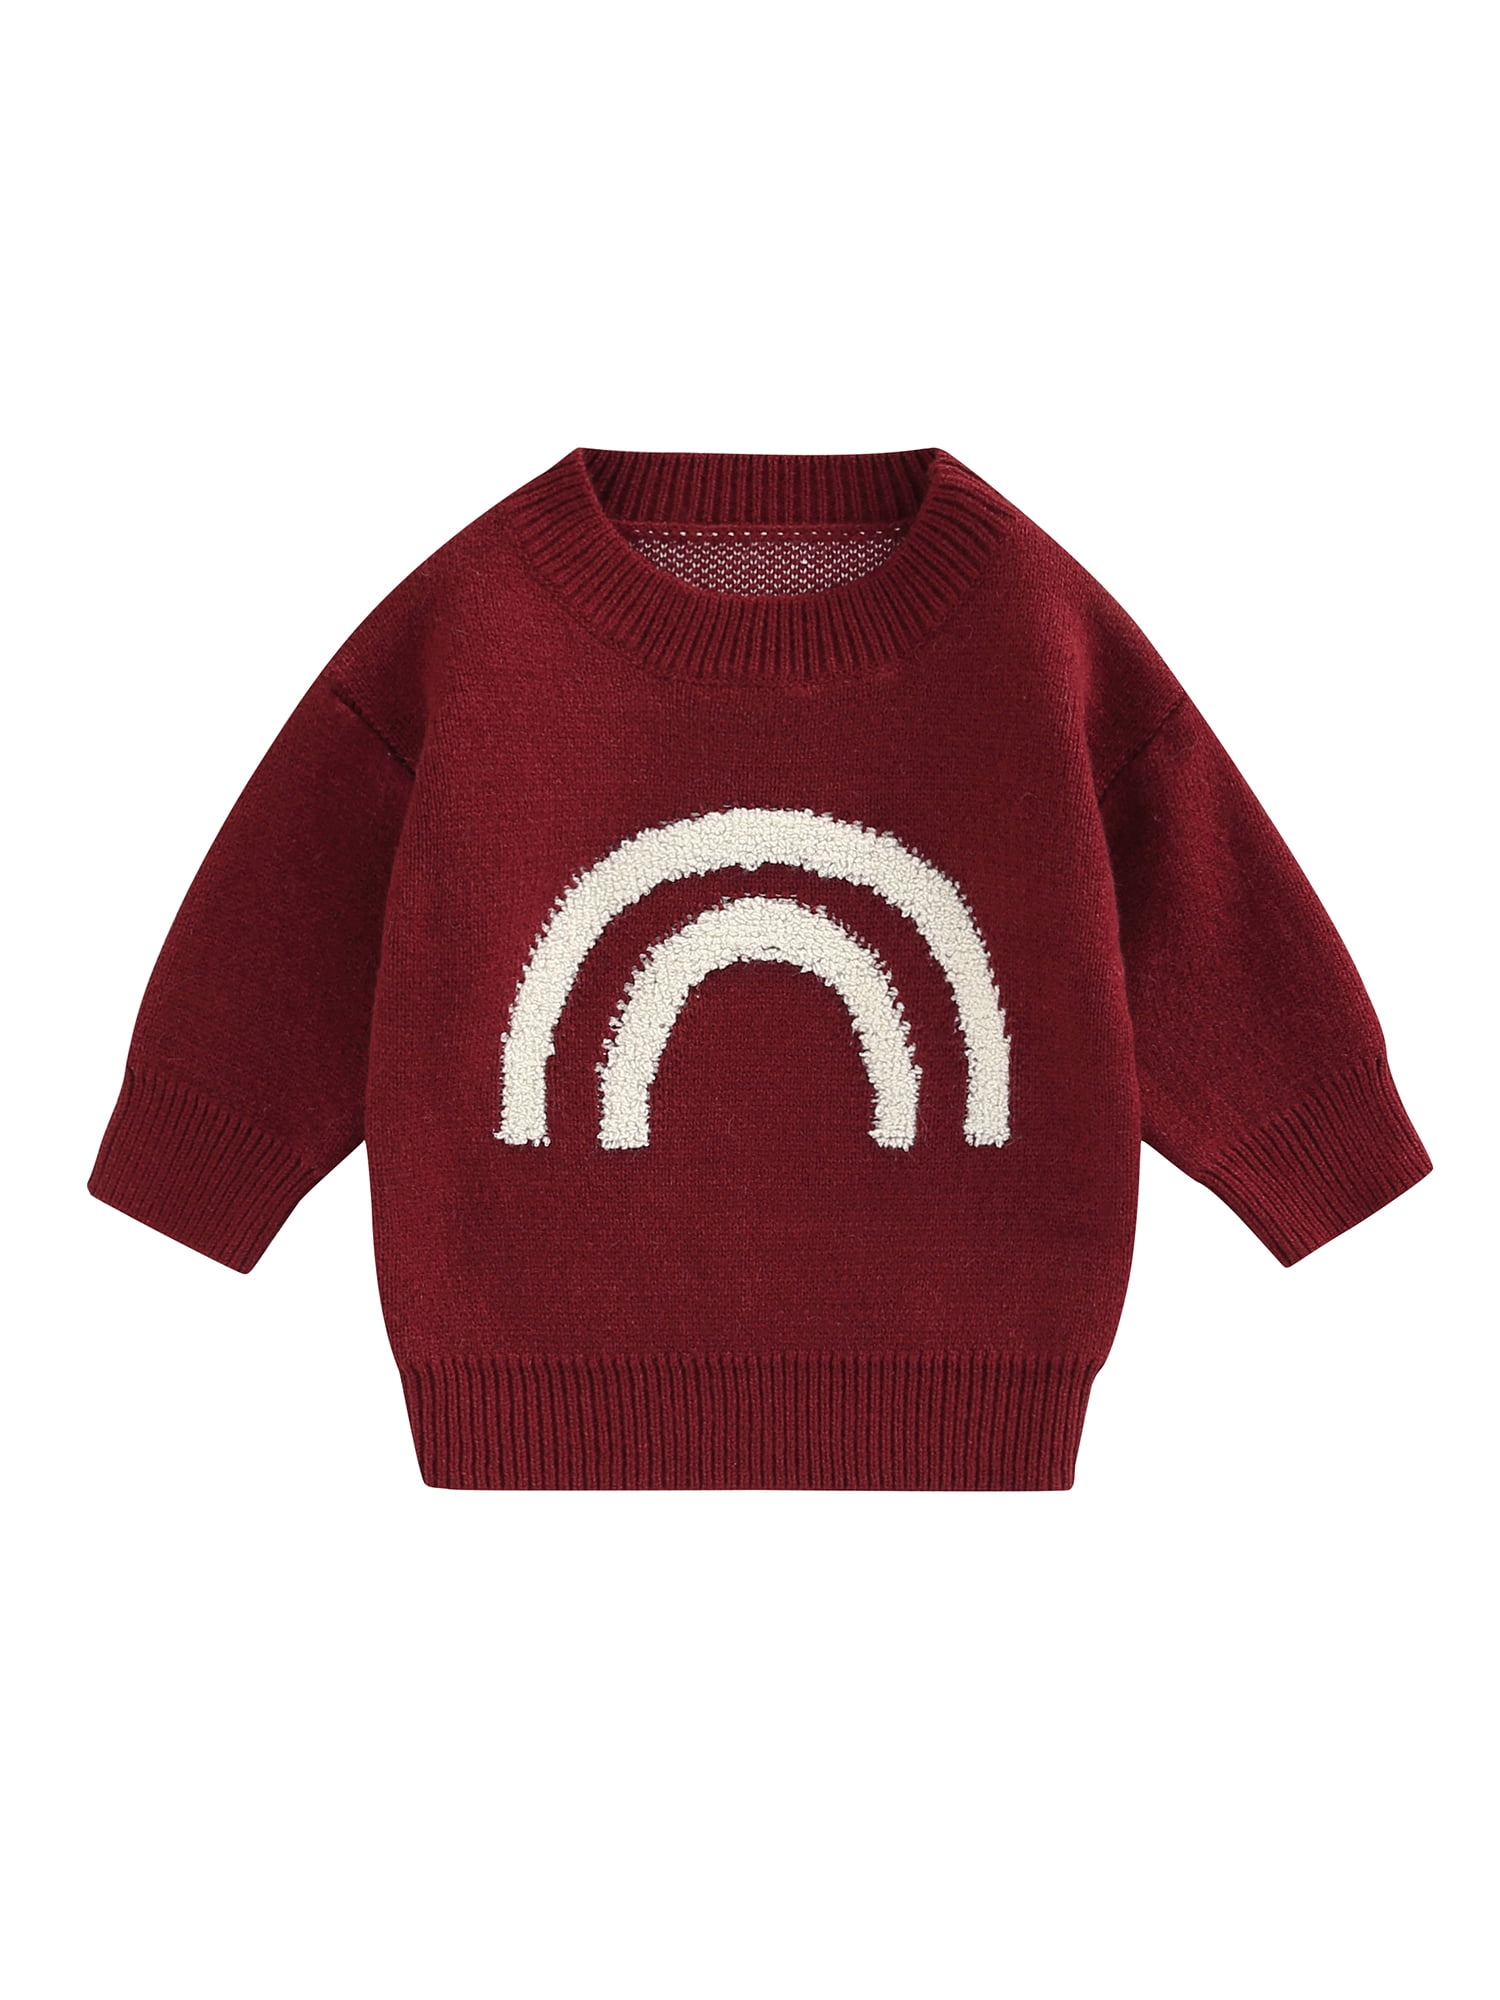 Unisex Baby Boy Girl Top Sweatshirt Long Sleeve Pullover Sweater Fall Winter Clothes 